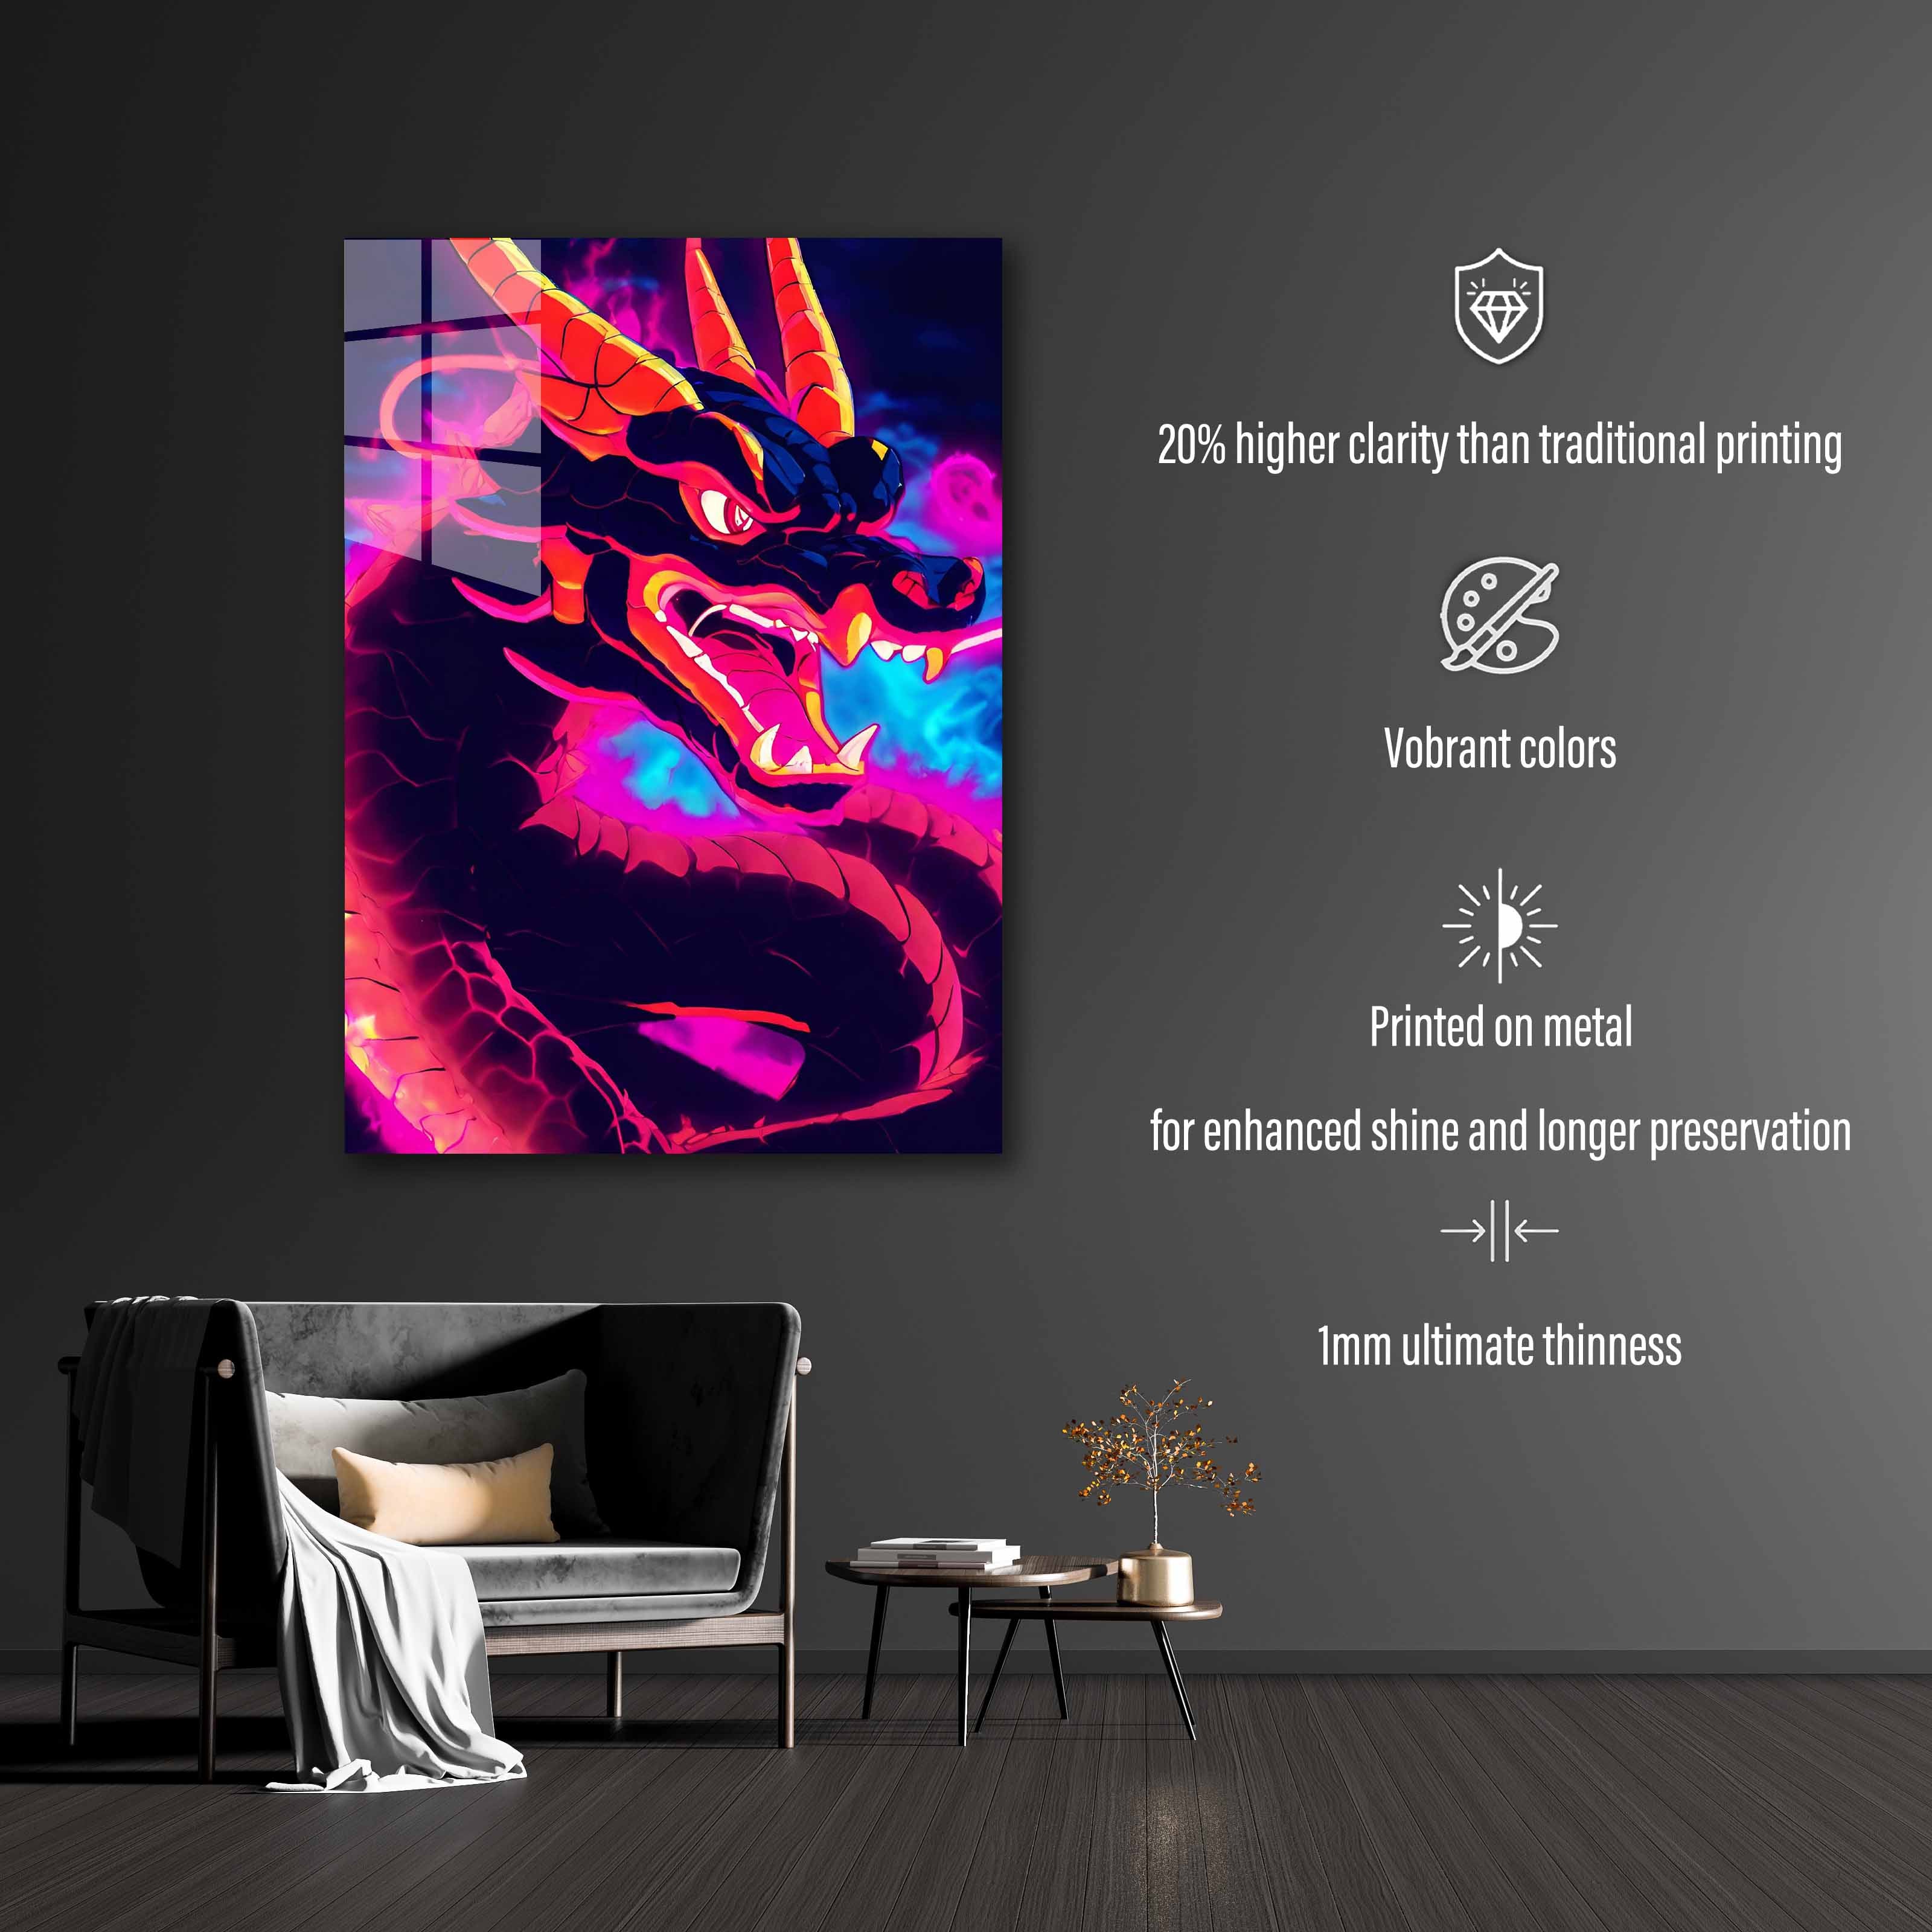 Dragon Fire-designed by @DynCreative